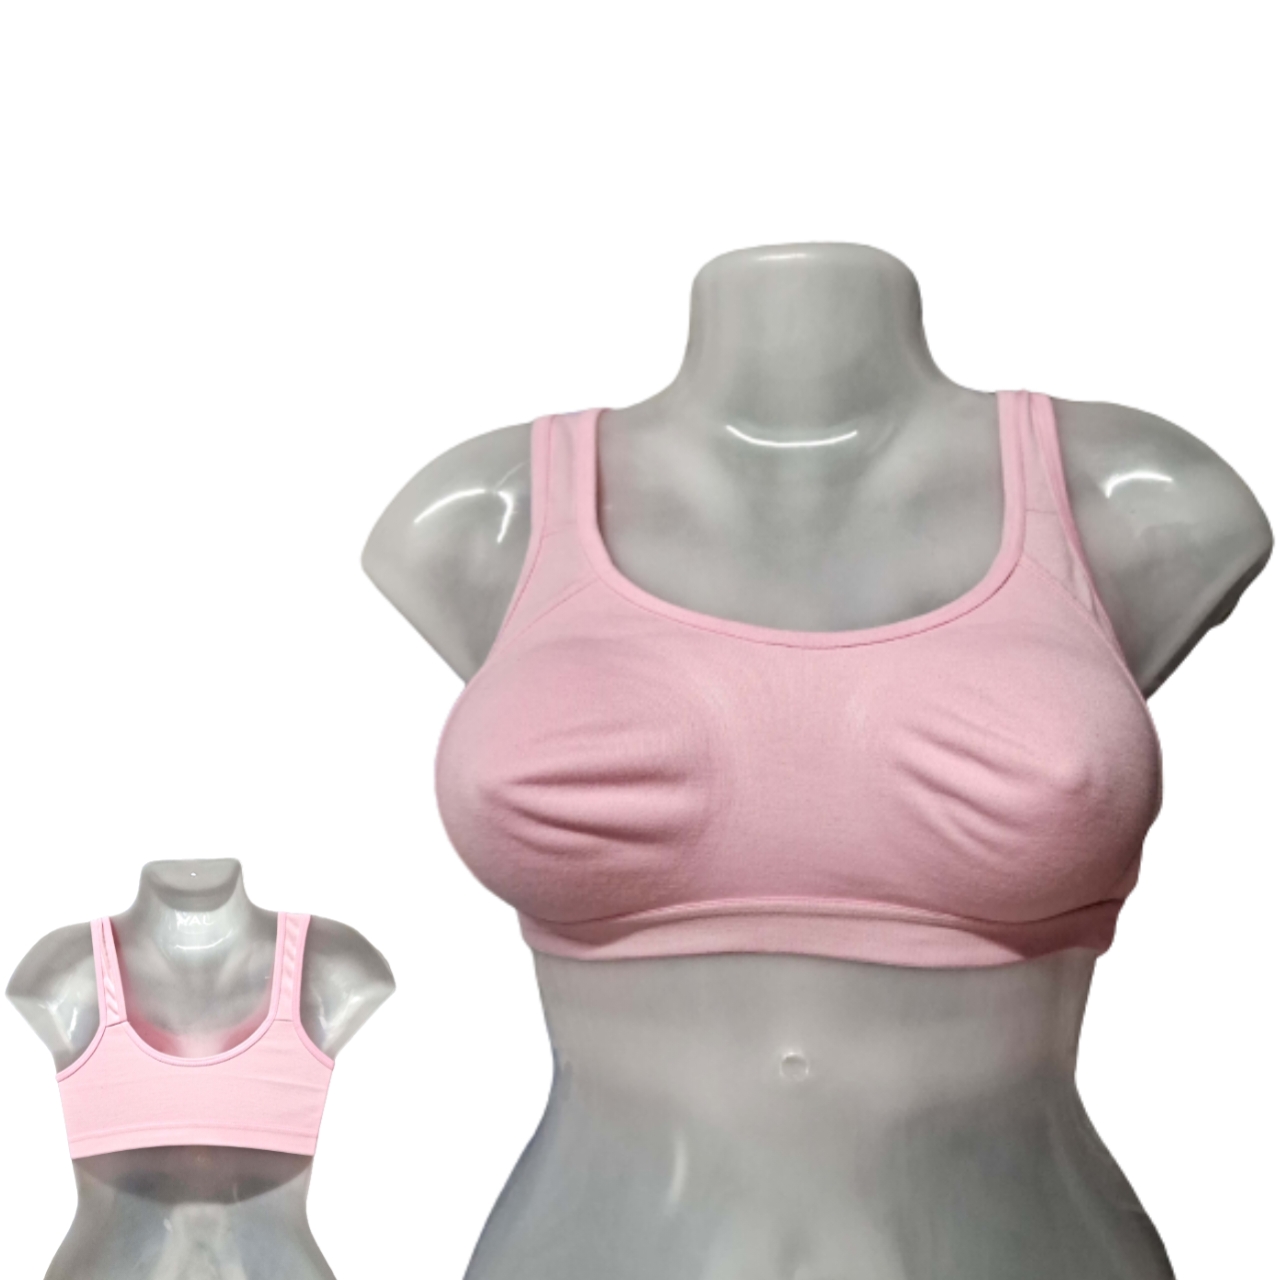 Shapyfy Super Comfy Sports Bra | Without Pad | Skin Friendly Elastics | Pink Color